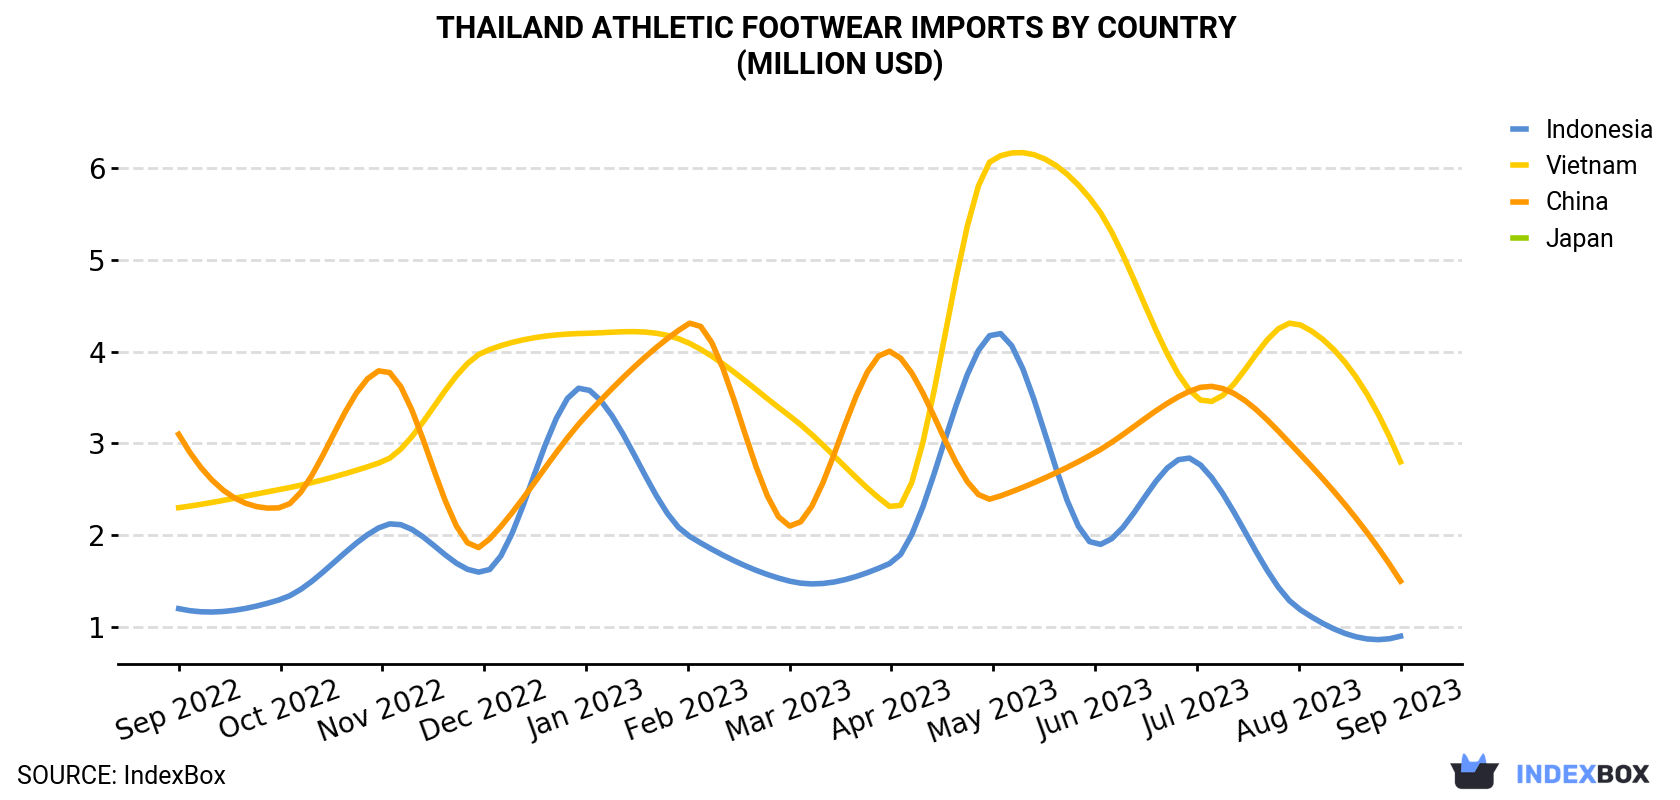 Thailand Athletic Footwear Imports By Country (Million USD)